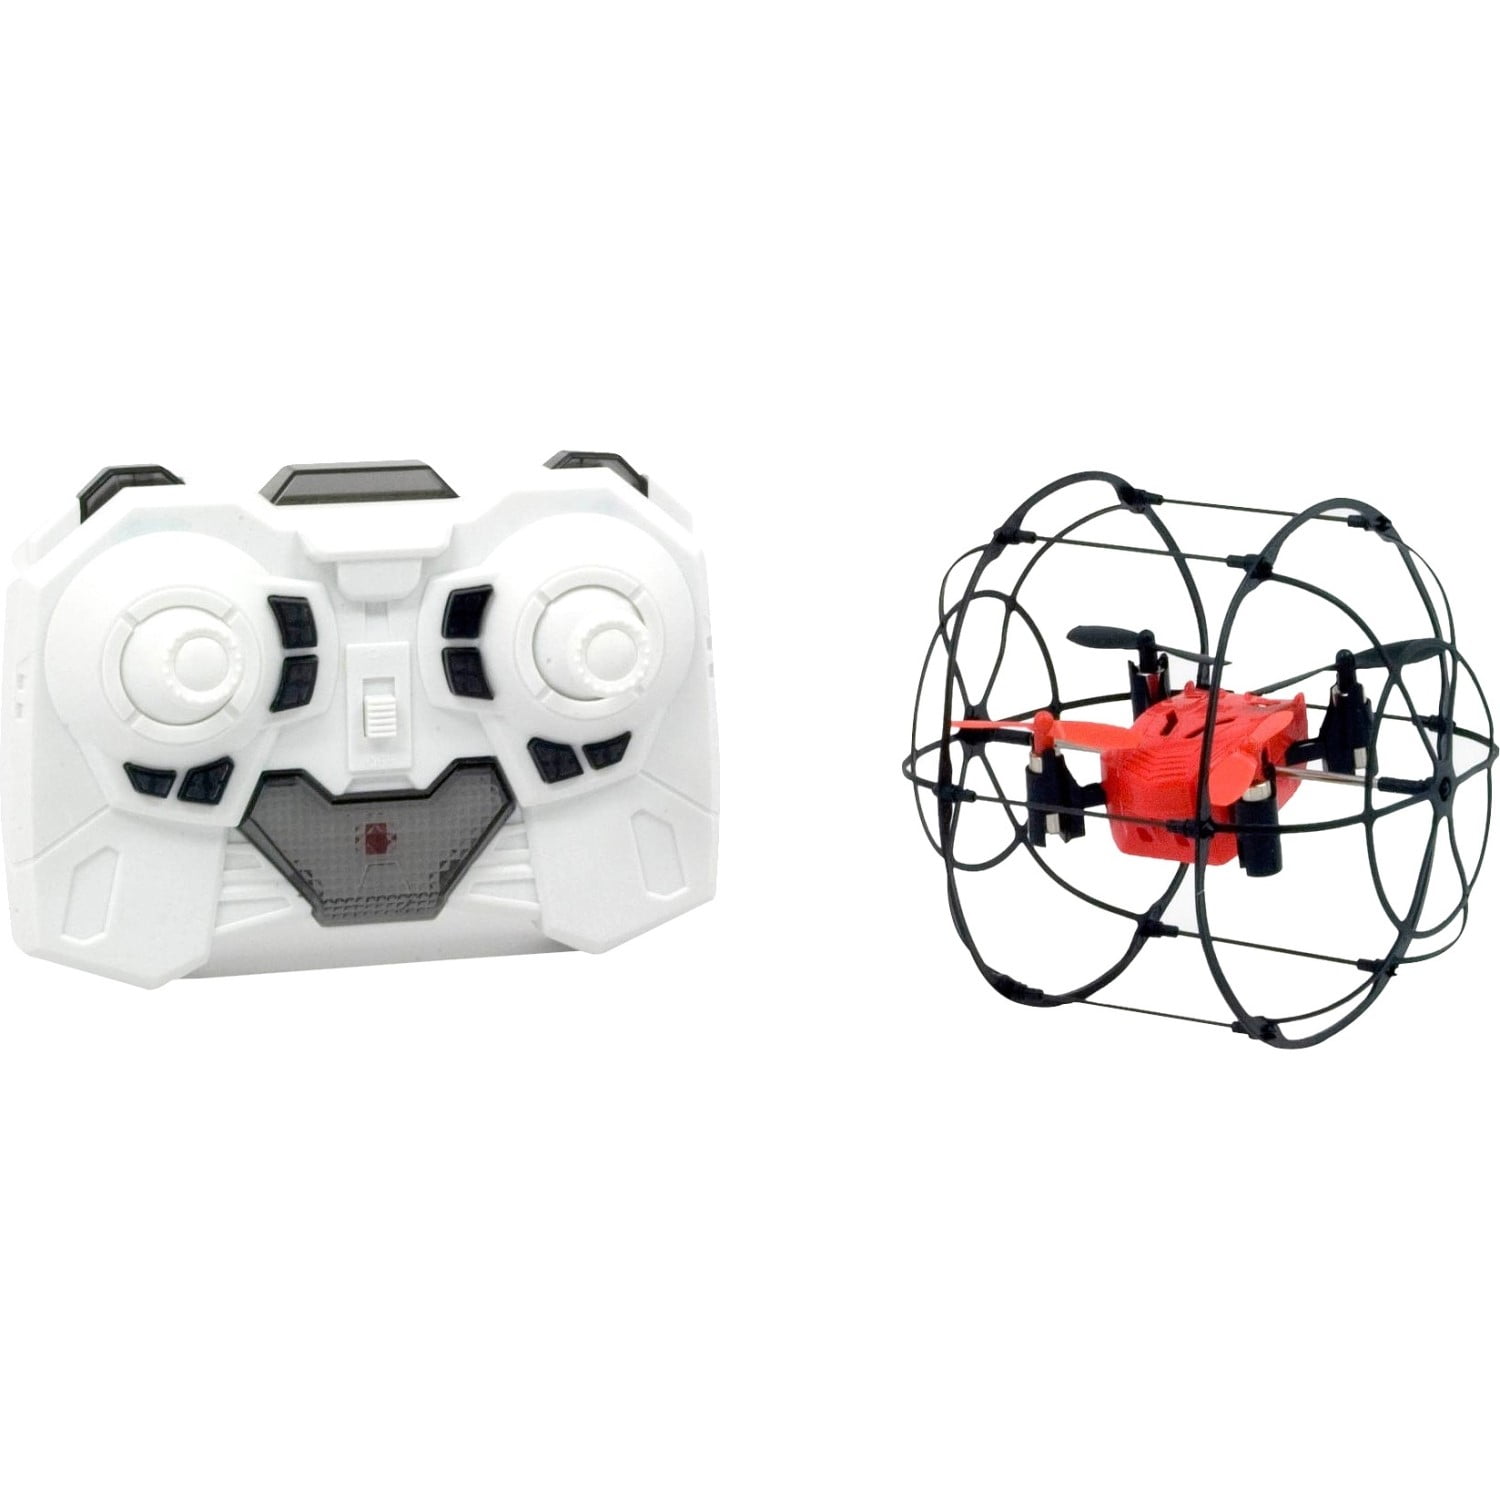 Odyssey ODY1012BR Turbo Runner Climbing & Rolling Quadcopter Red/black for sale online 